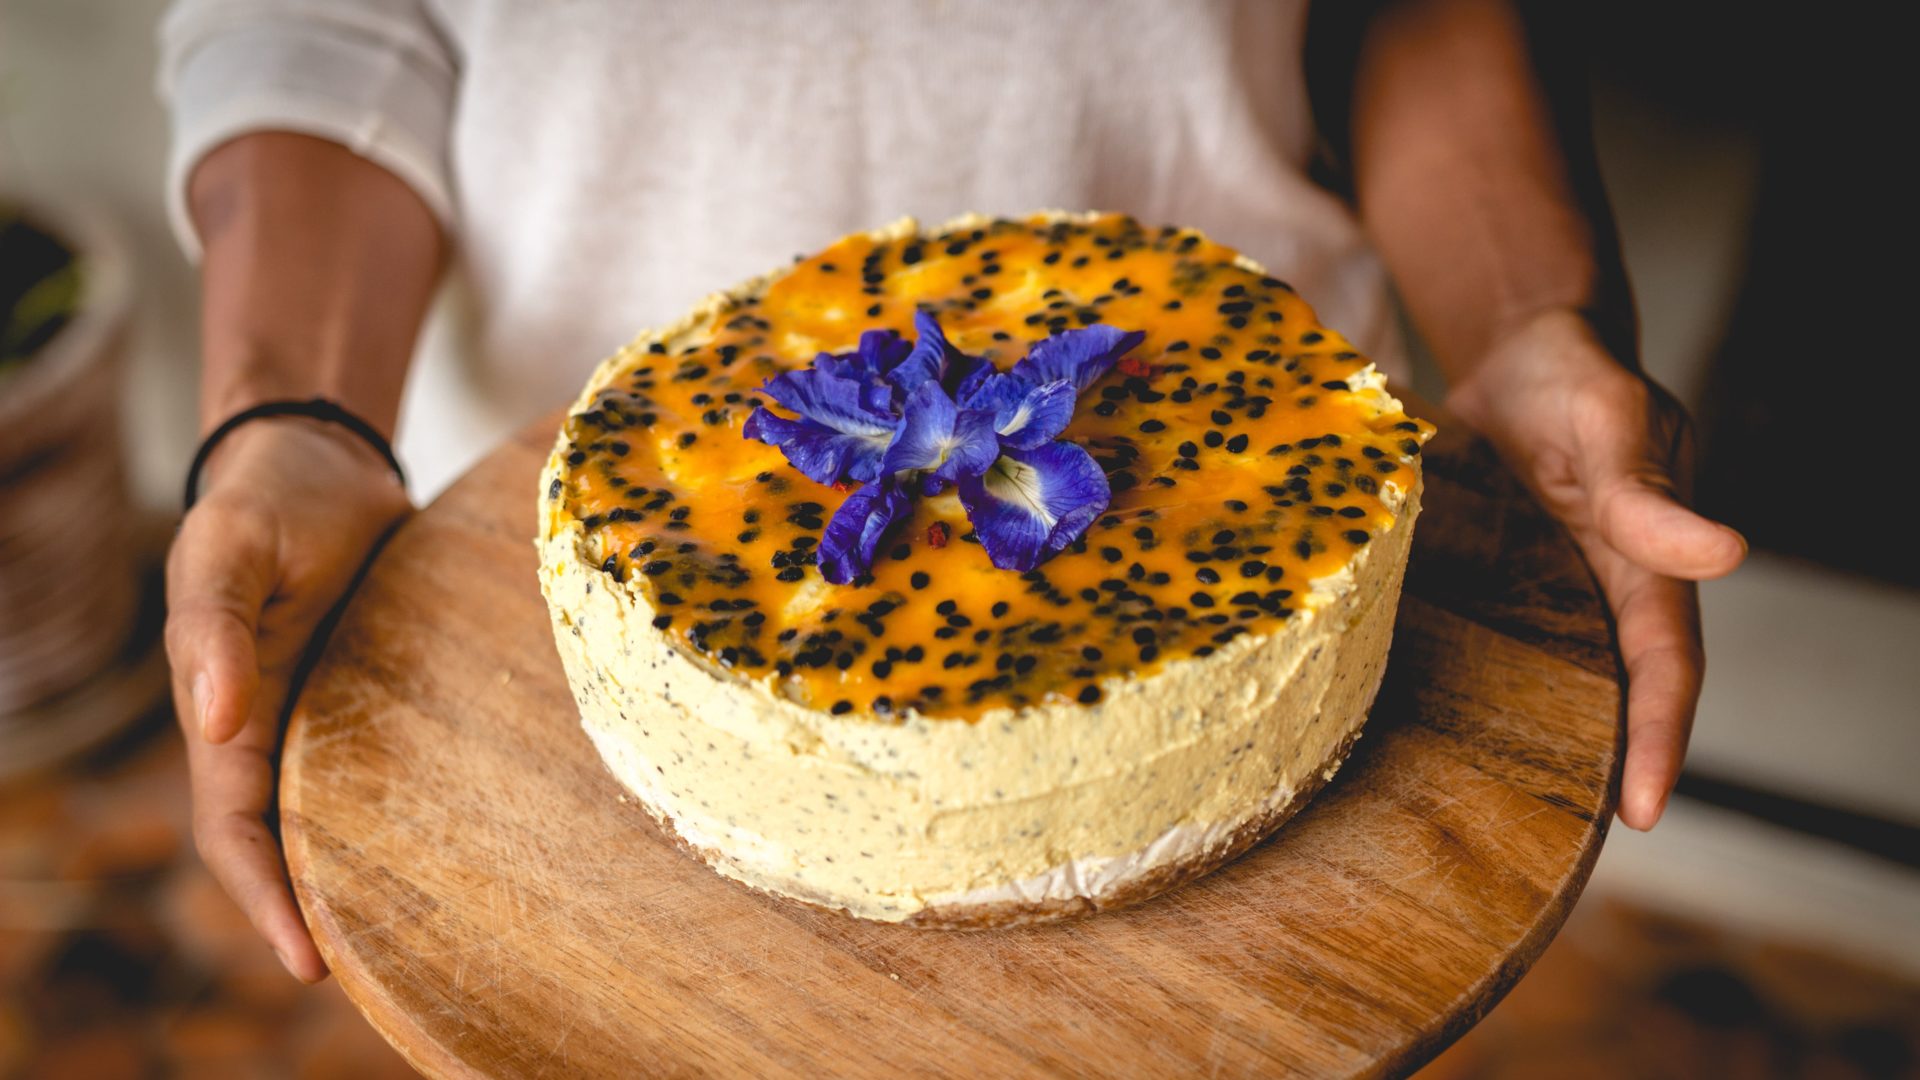 Delicious Food From The Restaurant (vegan Passion Fruit Cake)